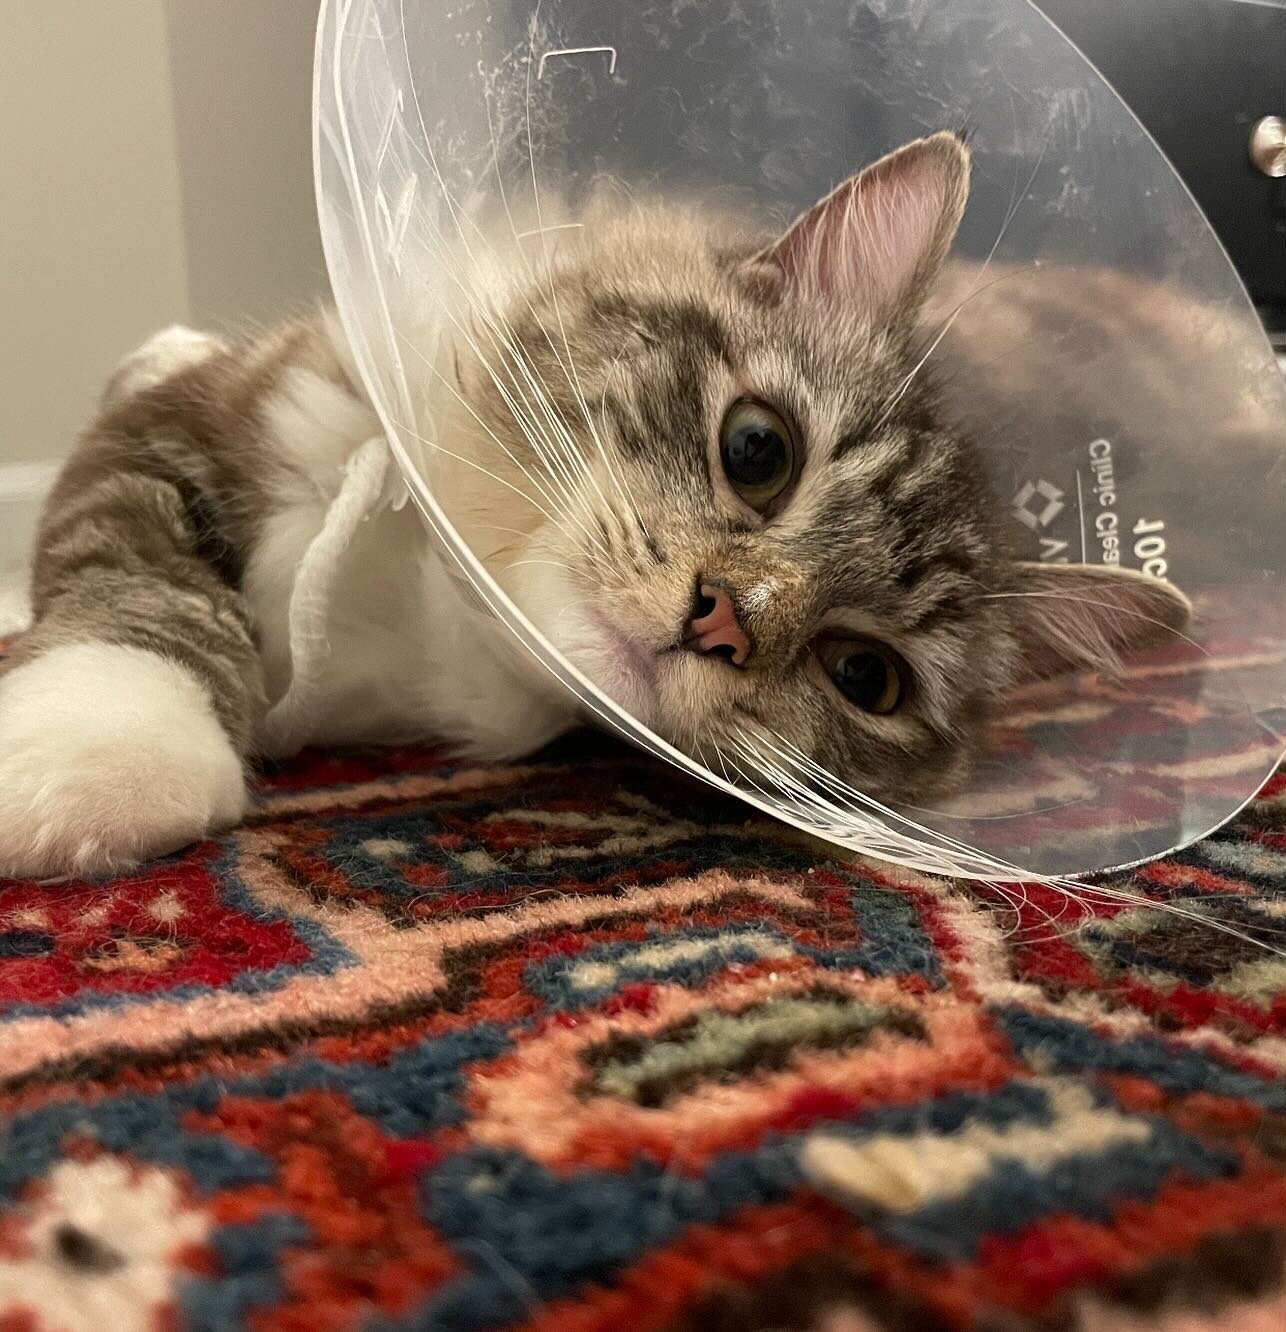 Our little cone-head is home